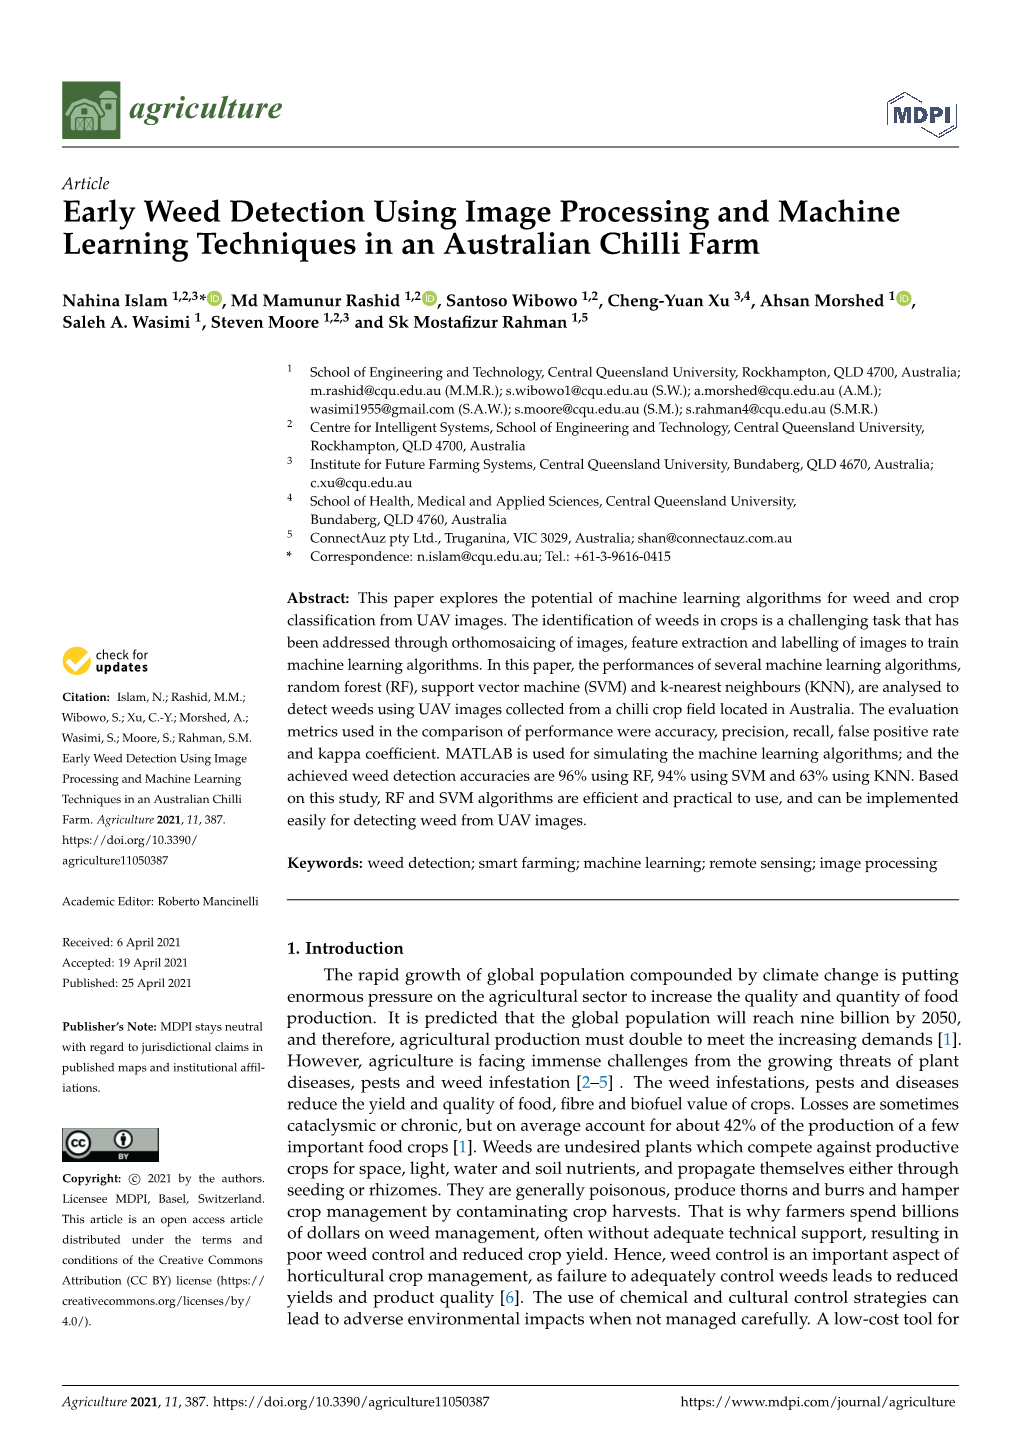 Early Weed Detection Using Image Processing and Machine Learning Techniques in an Australian Chilli Farm